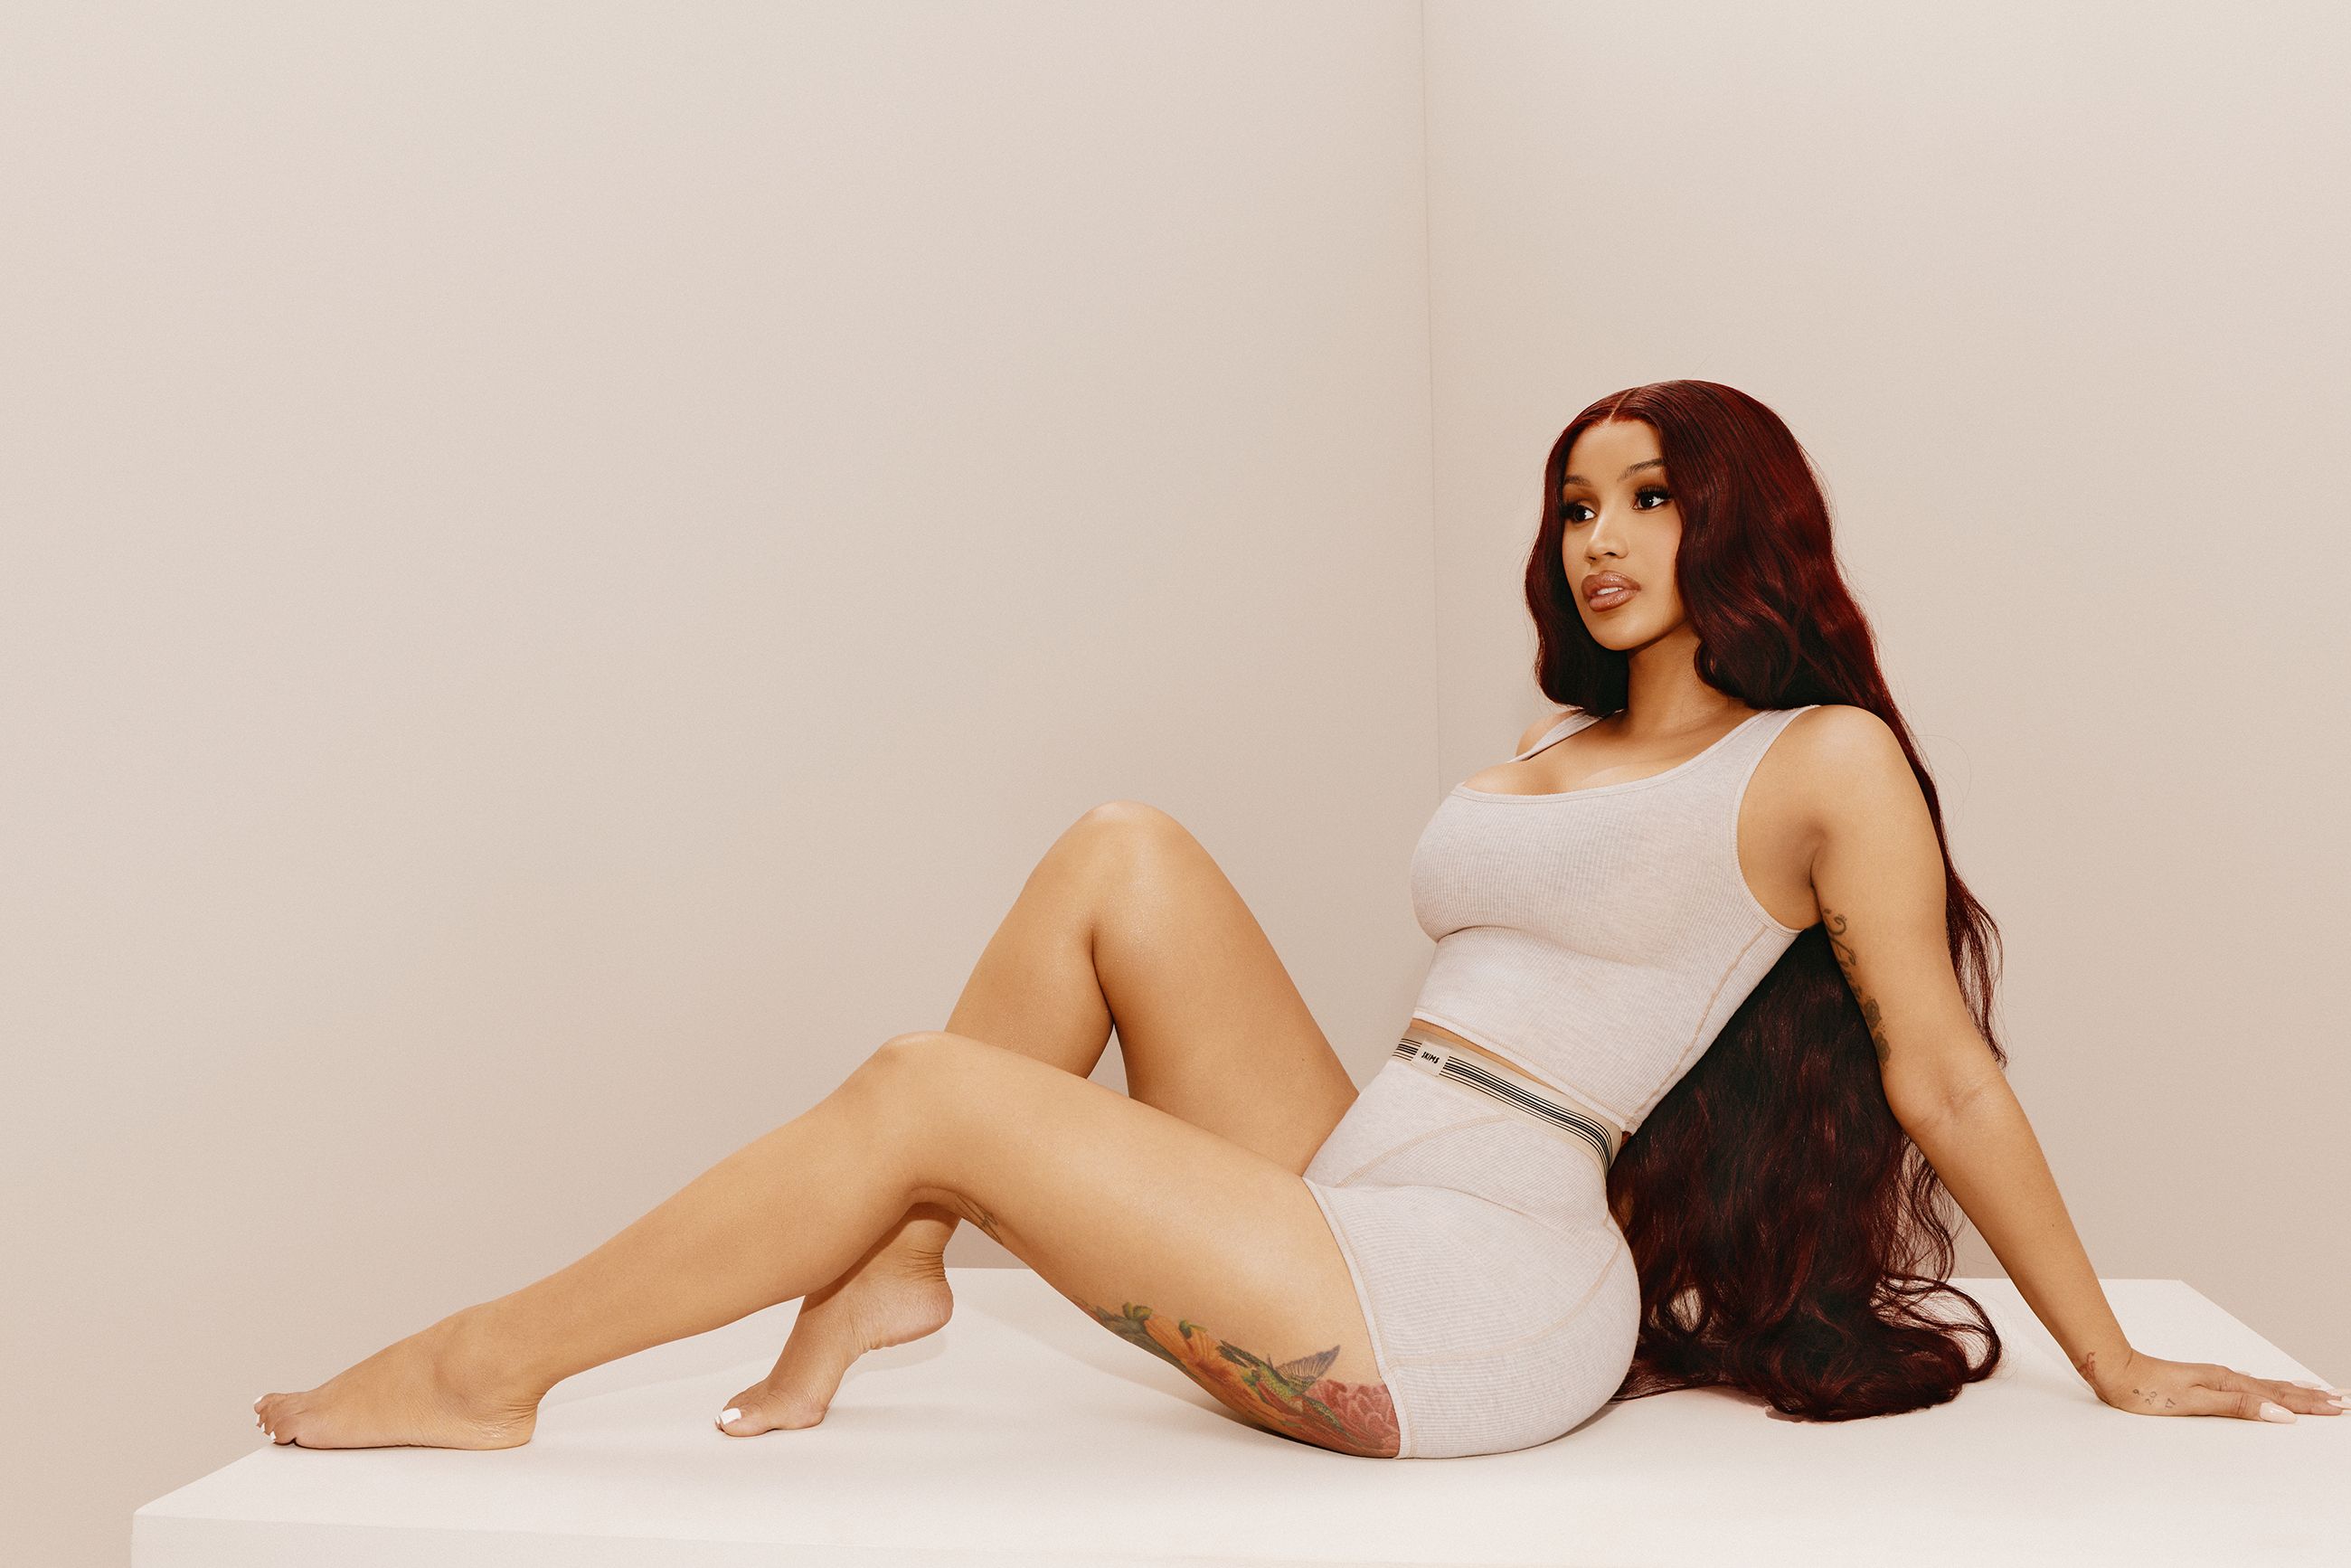 Cardi B Shows off Her Curves in SKIMS' Campaign